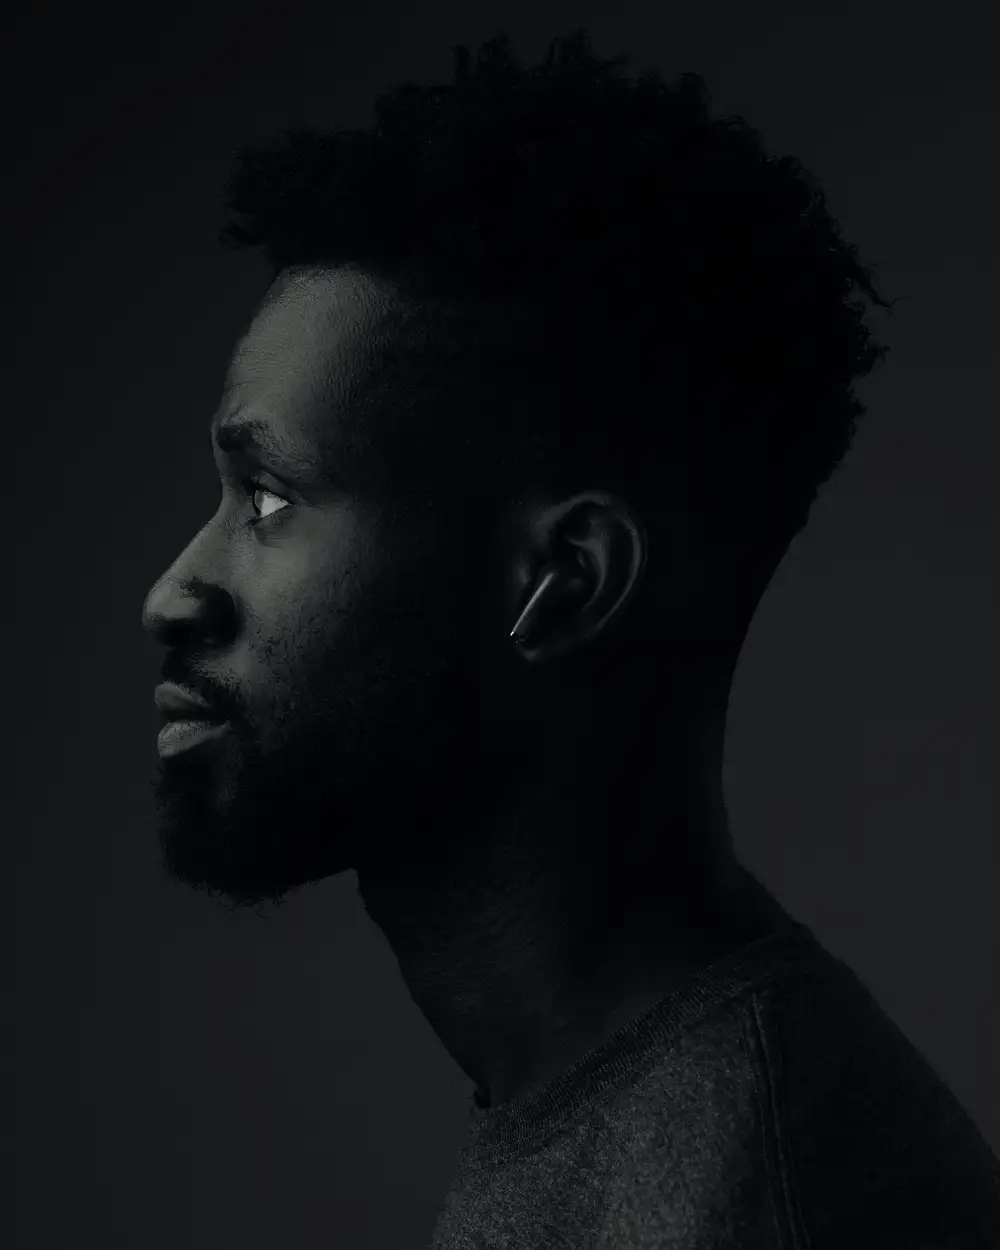 Black and white head portrait of a black man putting on earphones